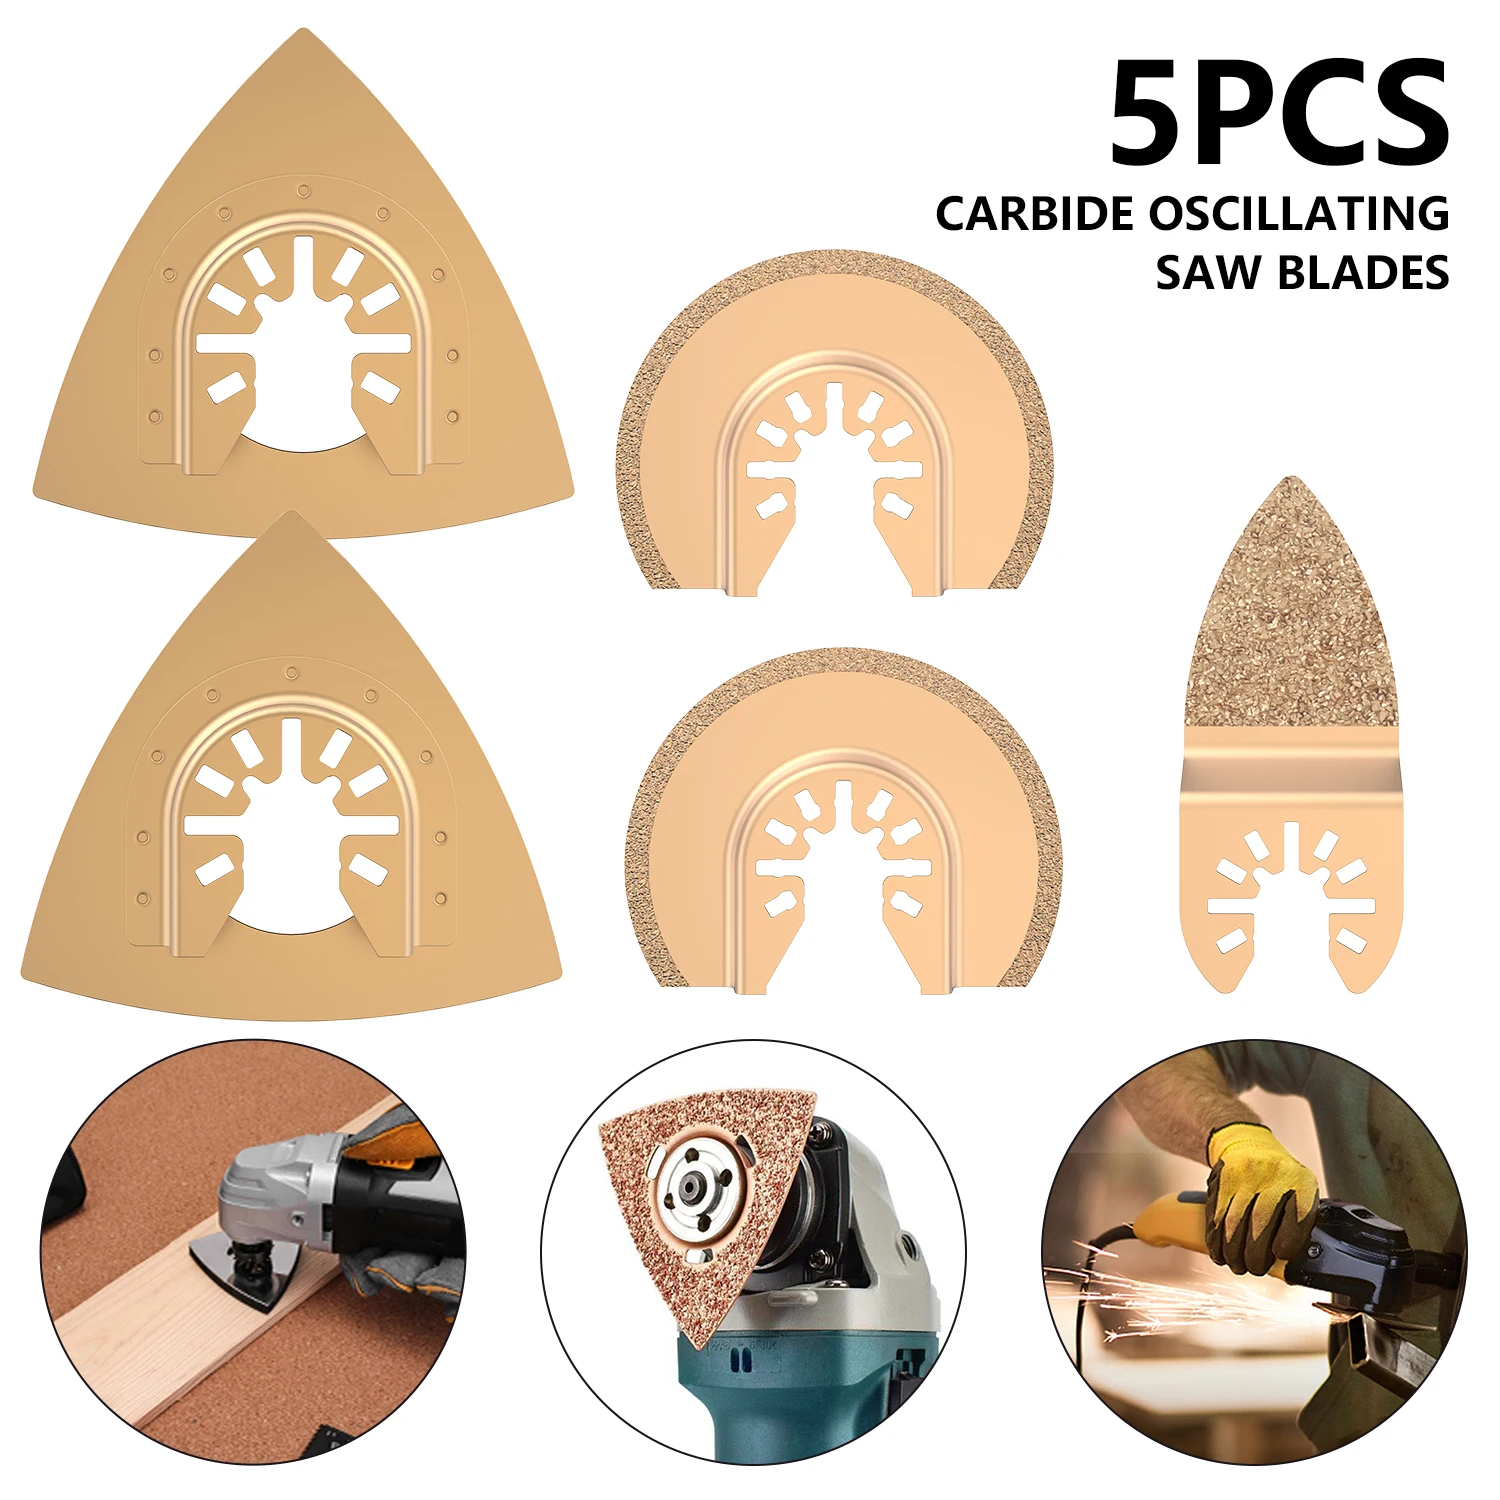 5PCS Carbide Oscillating Saw Blades Tile Prorous Tool Blades Concrete Cement Ceramics Cutter for Universal Multi-tool Fein